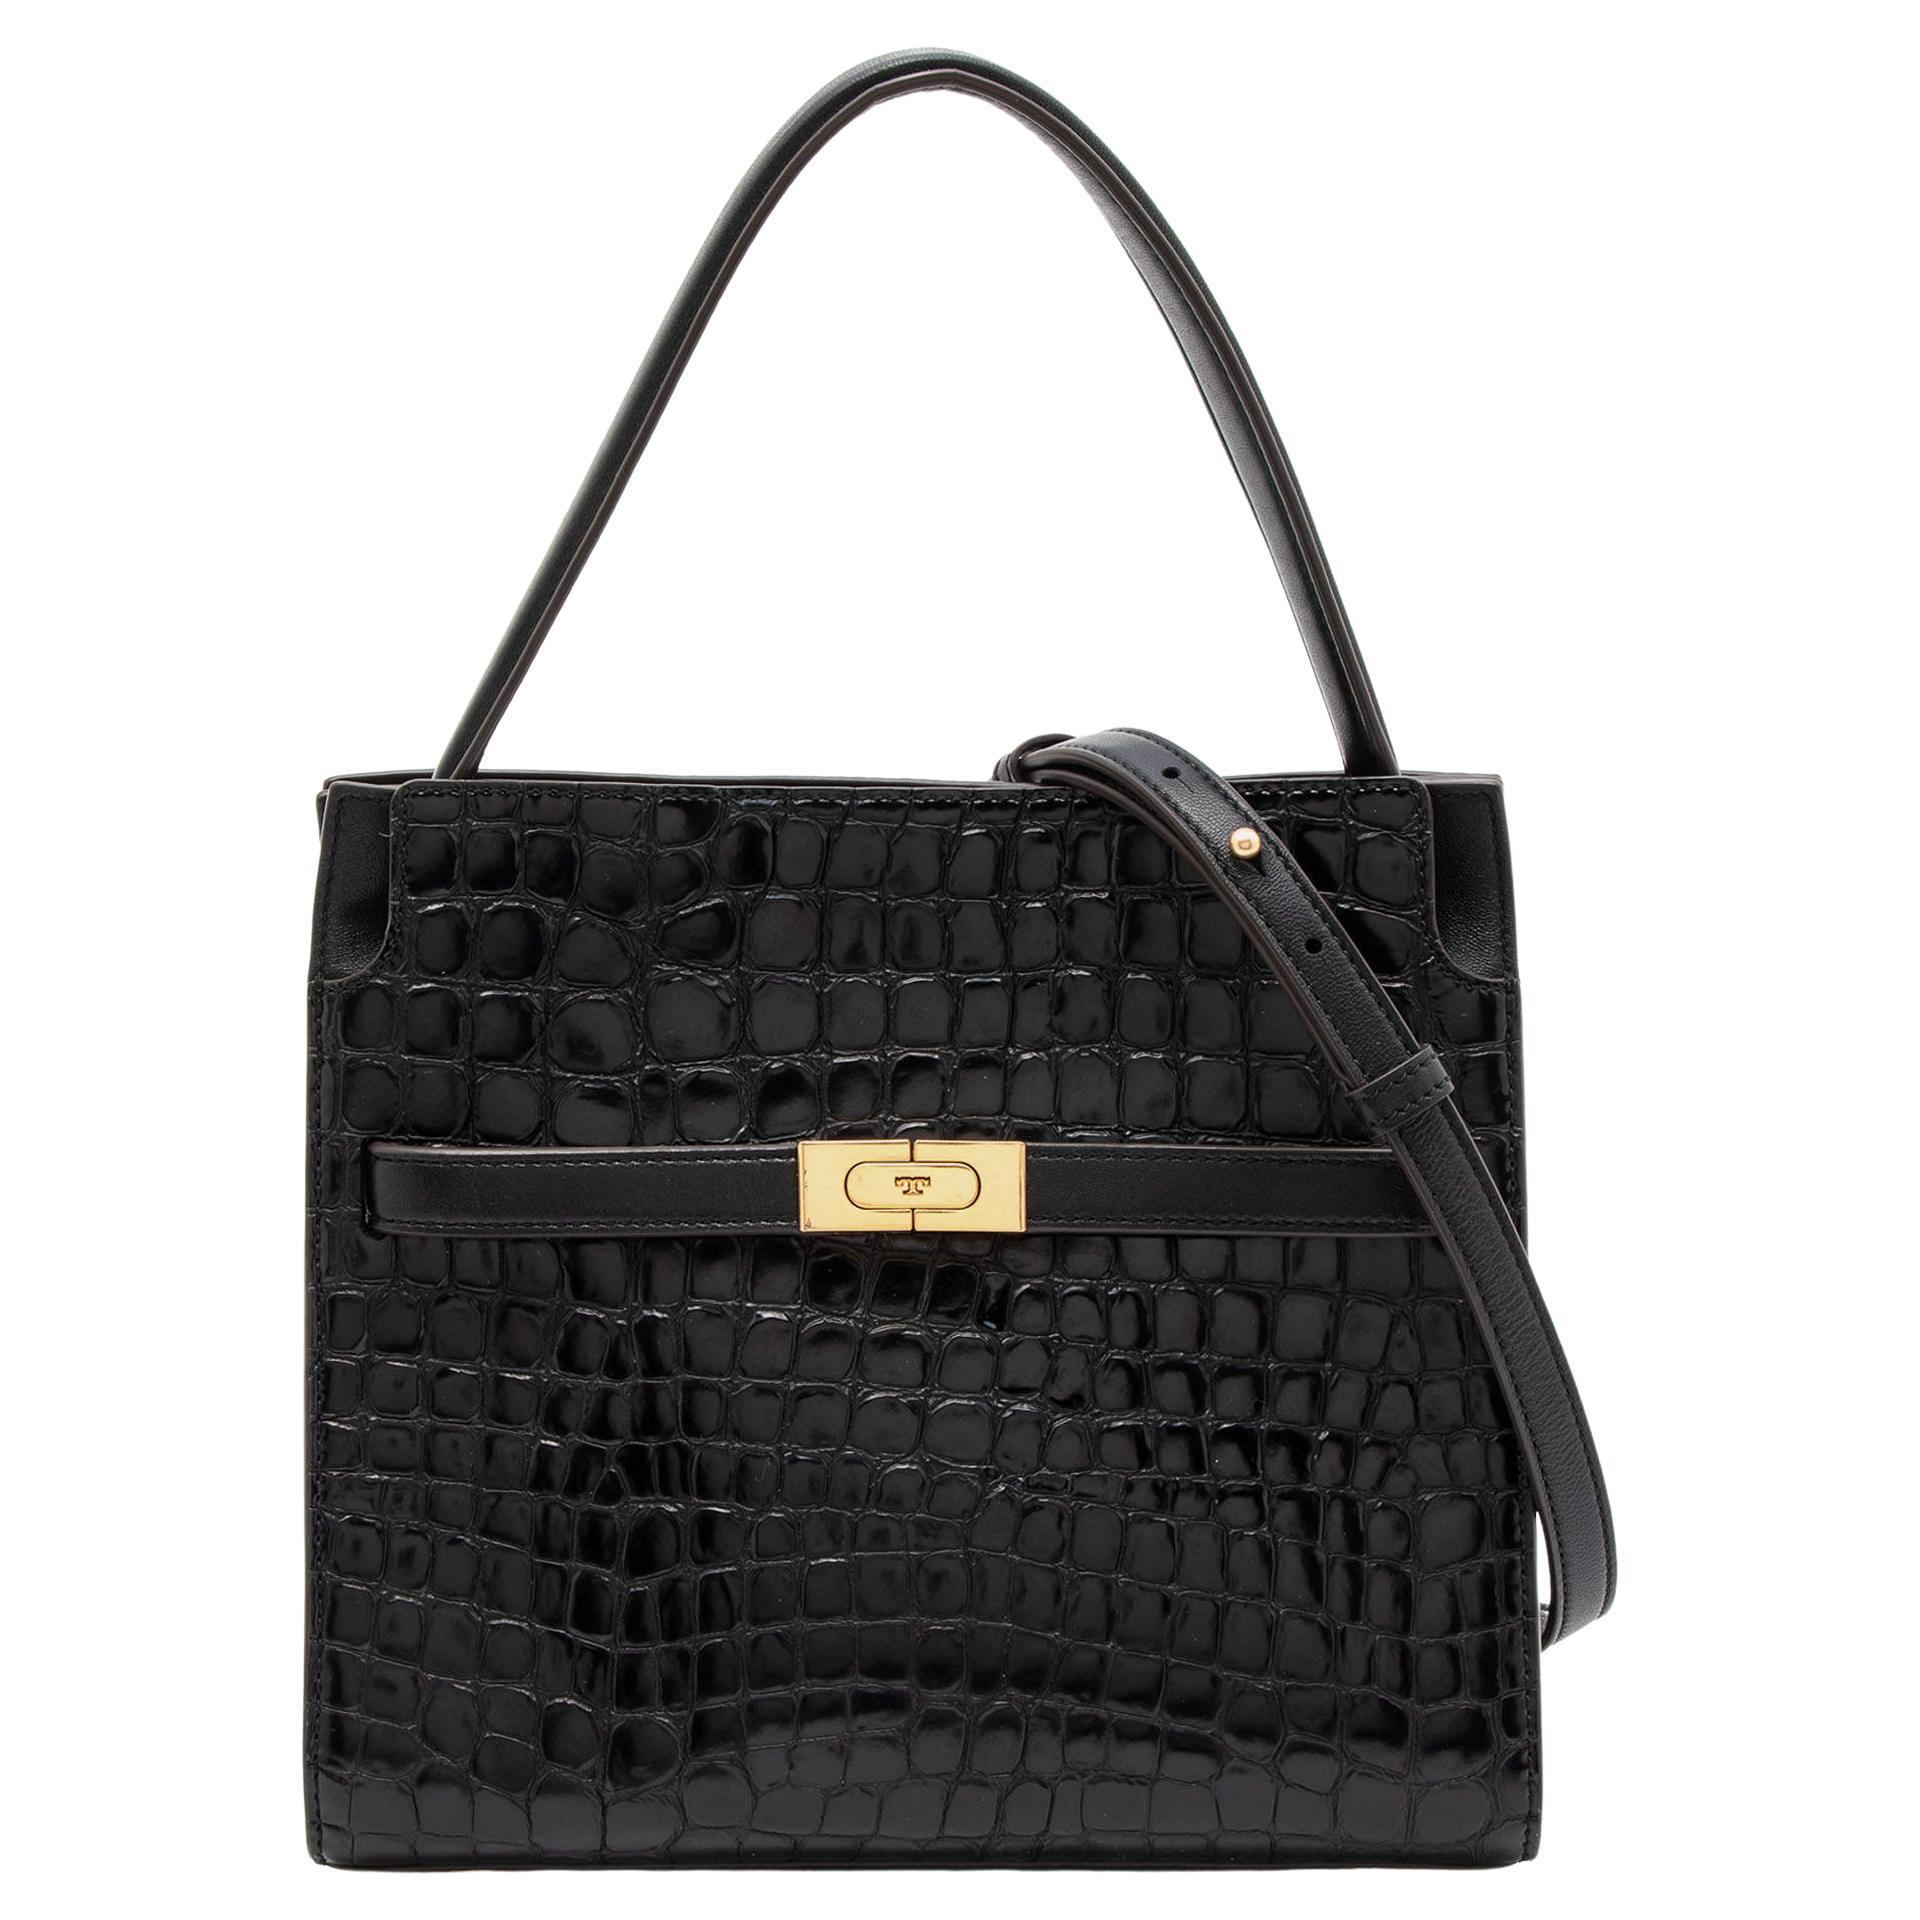 Tory Burch Black Croc Embossed Leather and Suede Small Lee Radziwill Double Bag